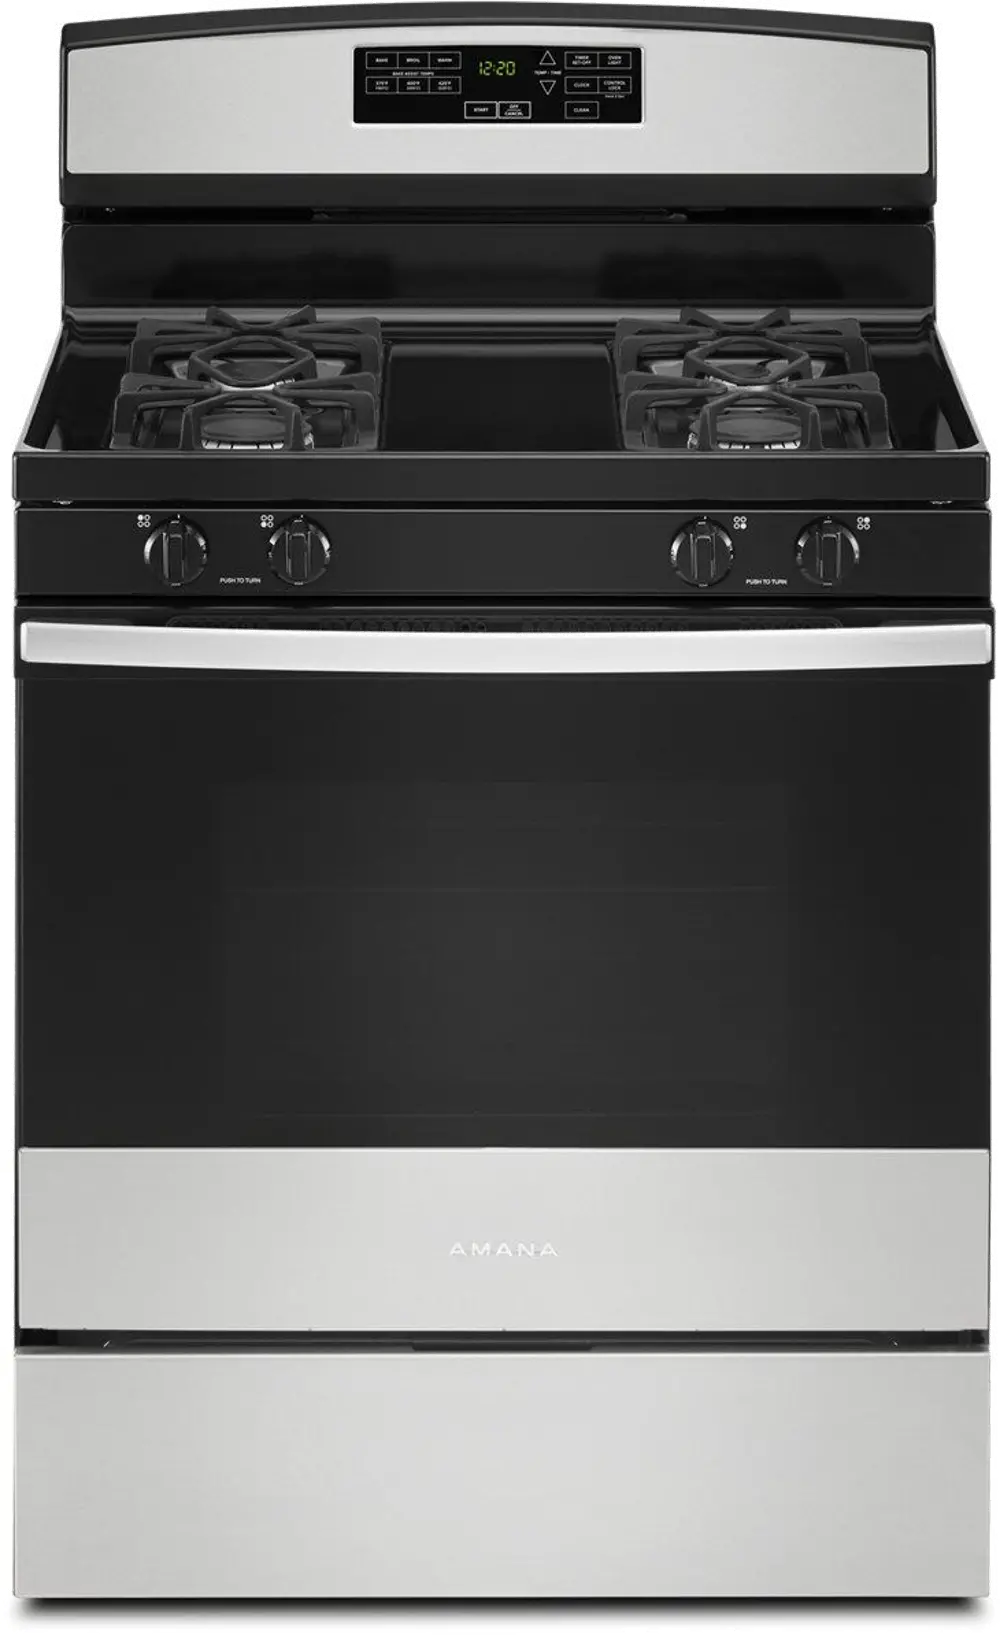 AGR6603SMS Amana 5.0 cu ft Gas Range - Stainless Steel-1